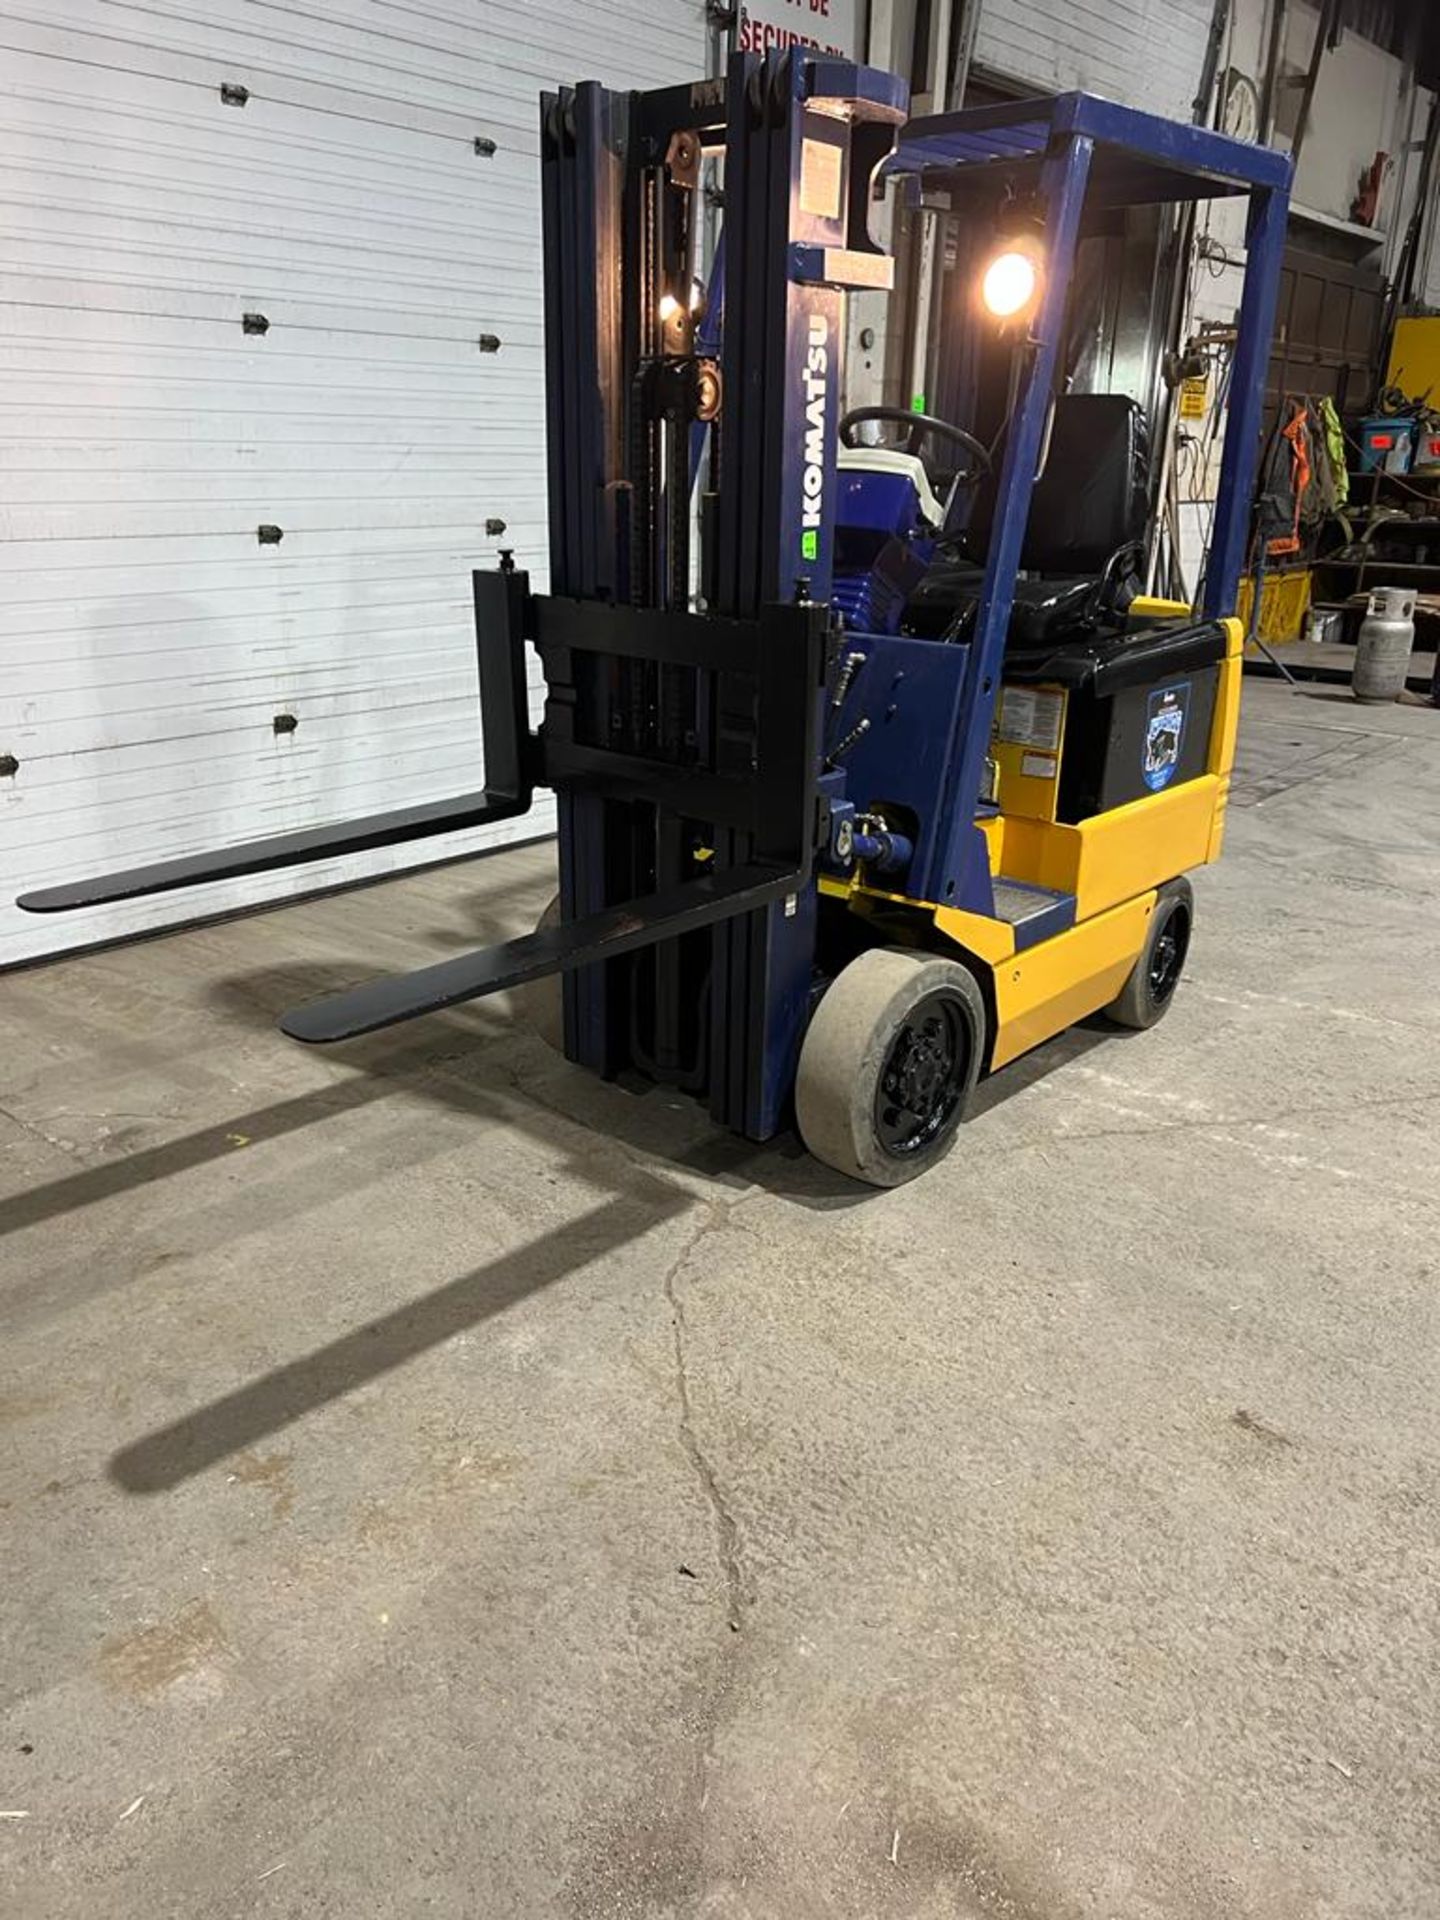 NICE Komatsu 4,000lbs Capacity Forklift with 3-stage mast Electric 36V with LOW HOURS - FREE - Image 3 of 3